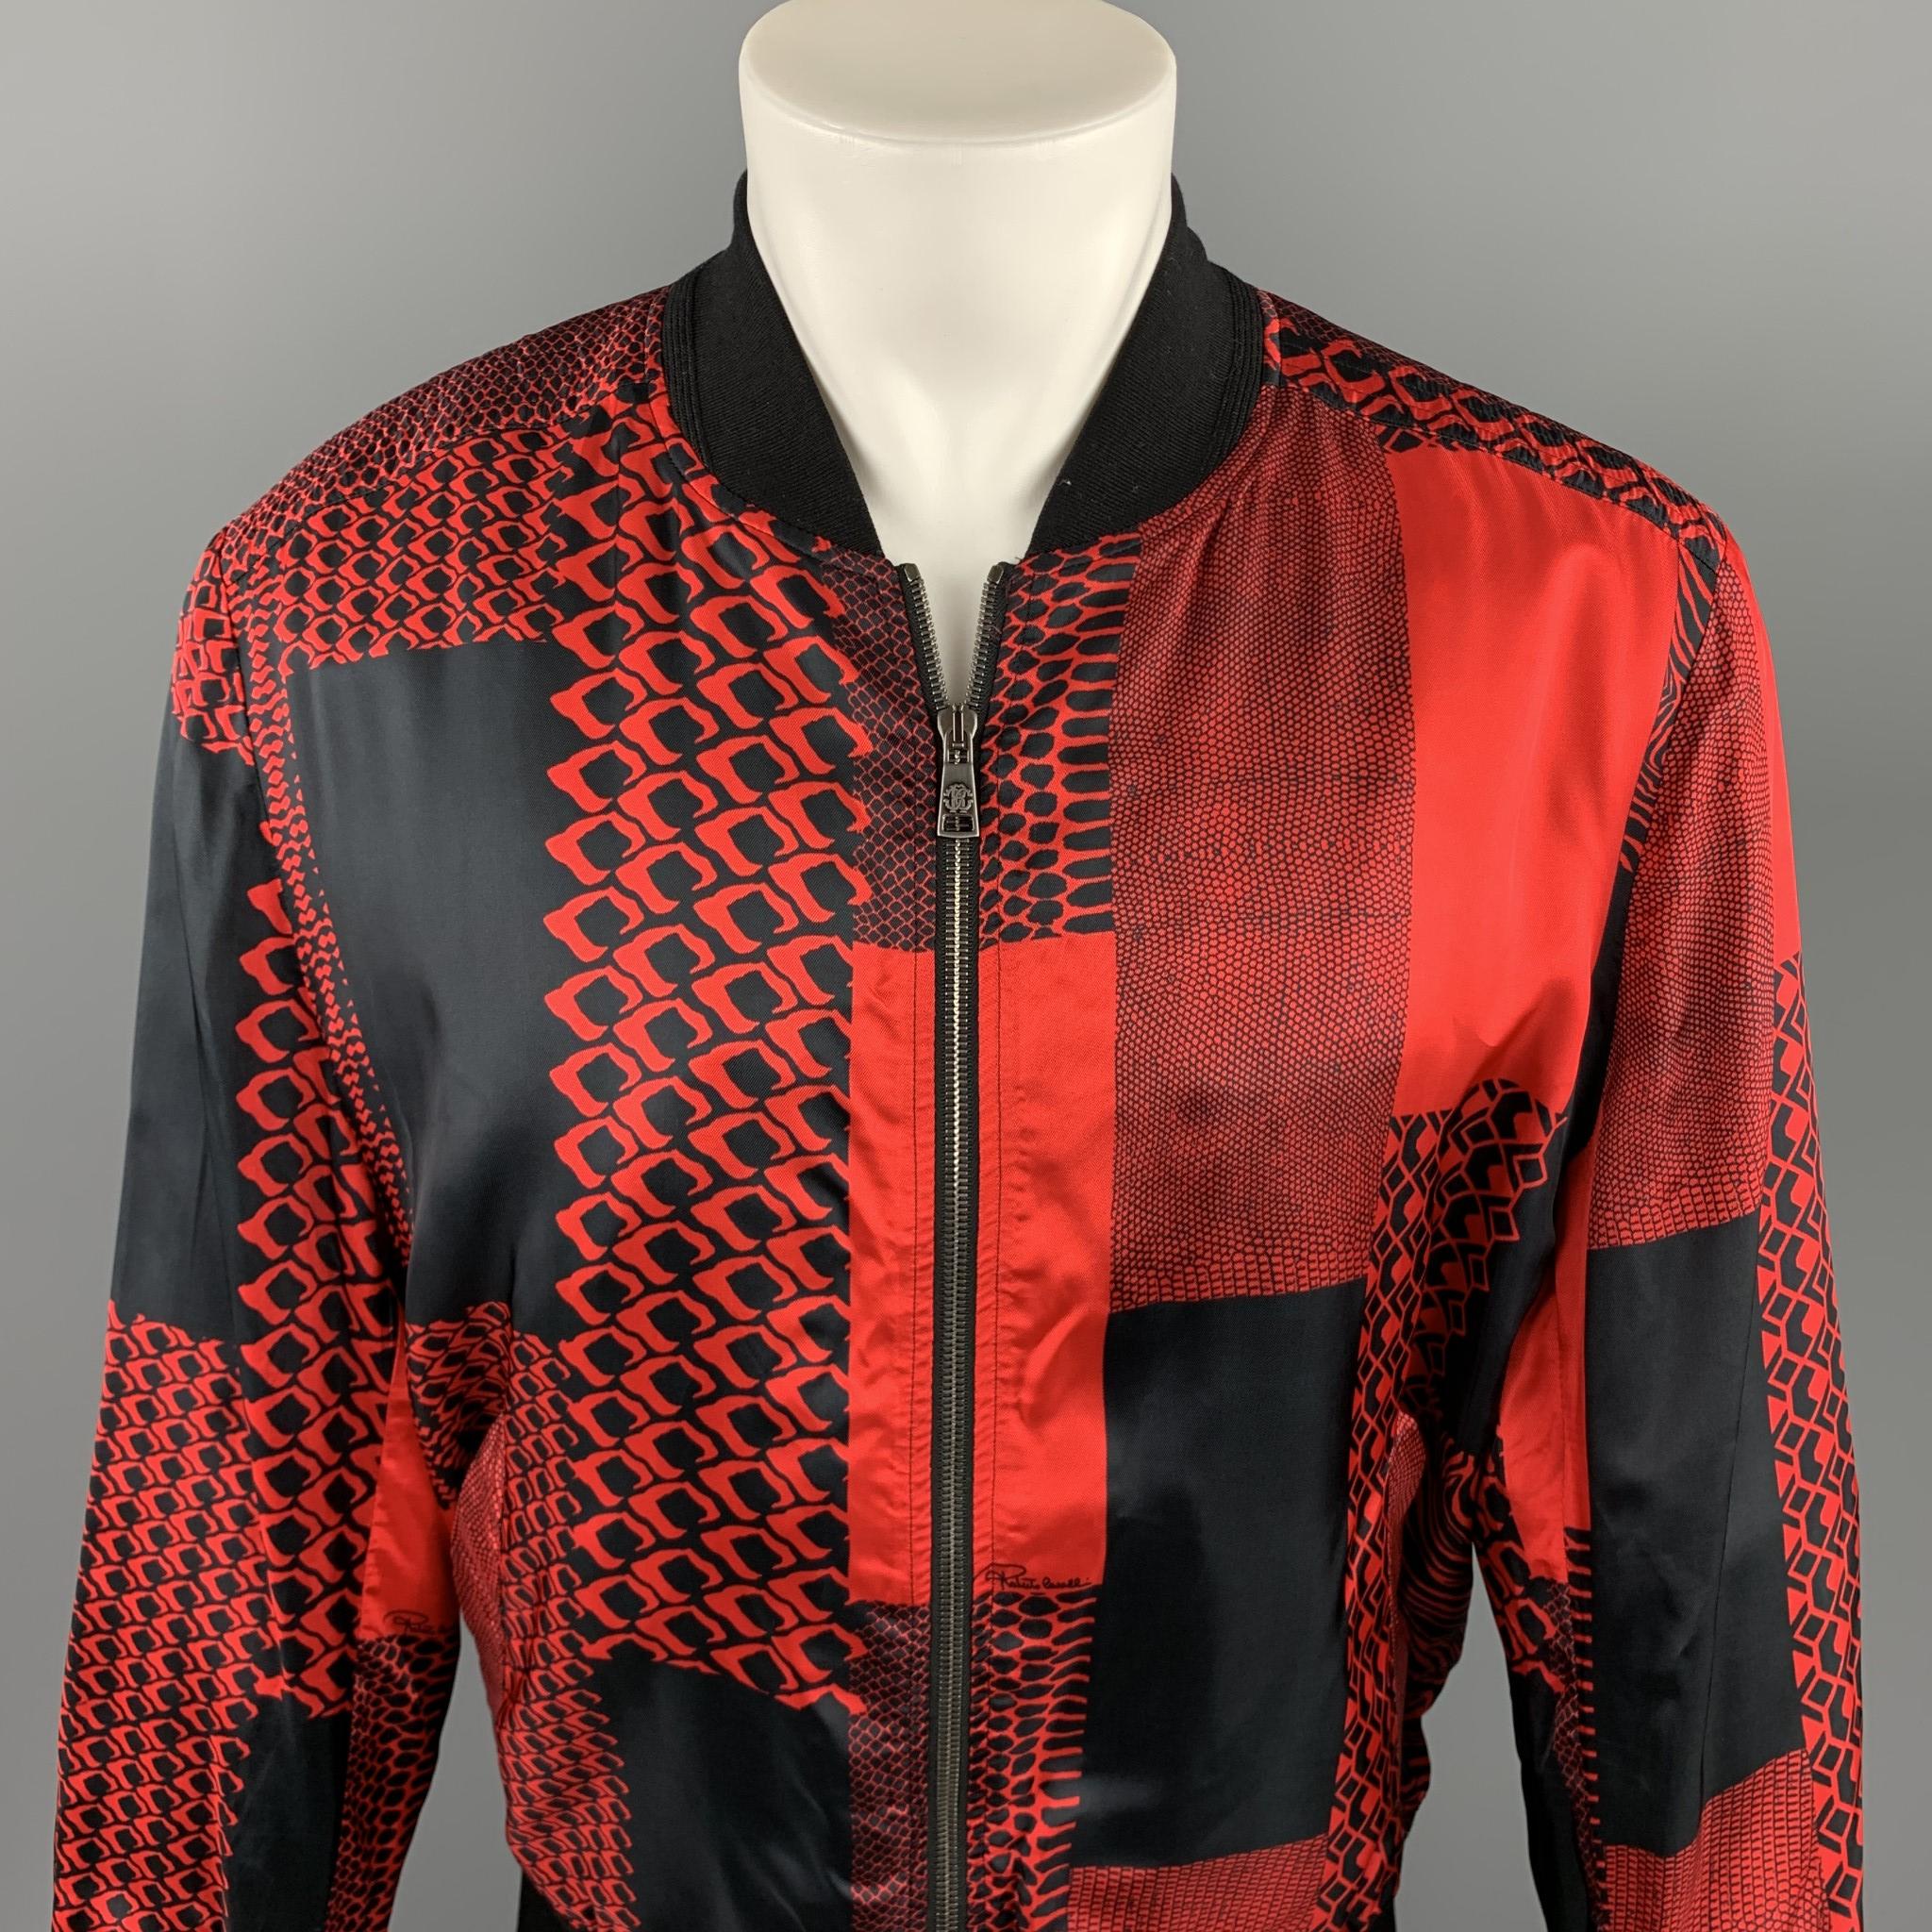 ROBERTO CAVALLI Pre-Fall 2018 jacket comes in a black & red viscose with an all over abstract pattern featuring a bomber style, slit pockets, and a zip up closure. Made in Italy.

Excellent Pre-Owned Condition.
Marked: IT